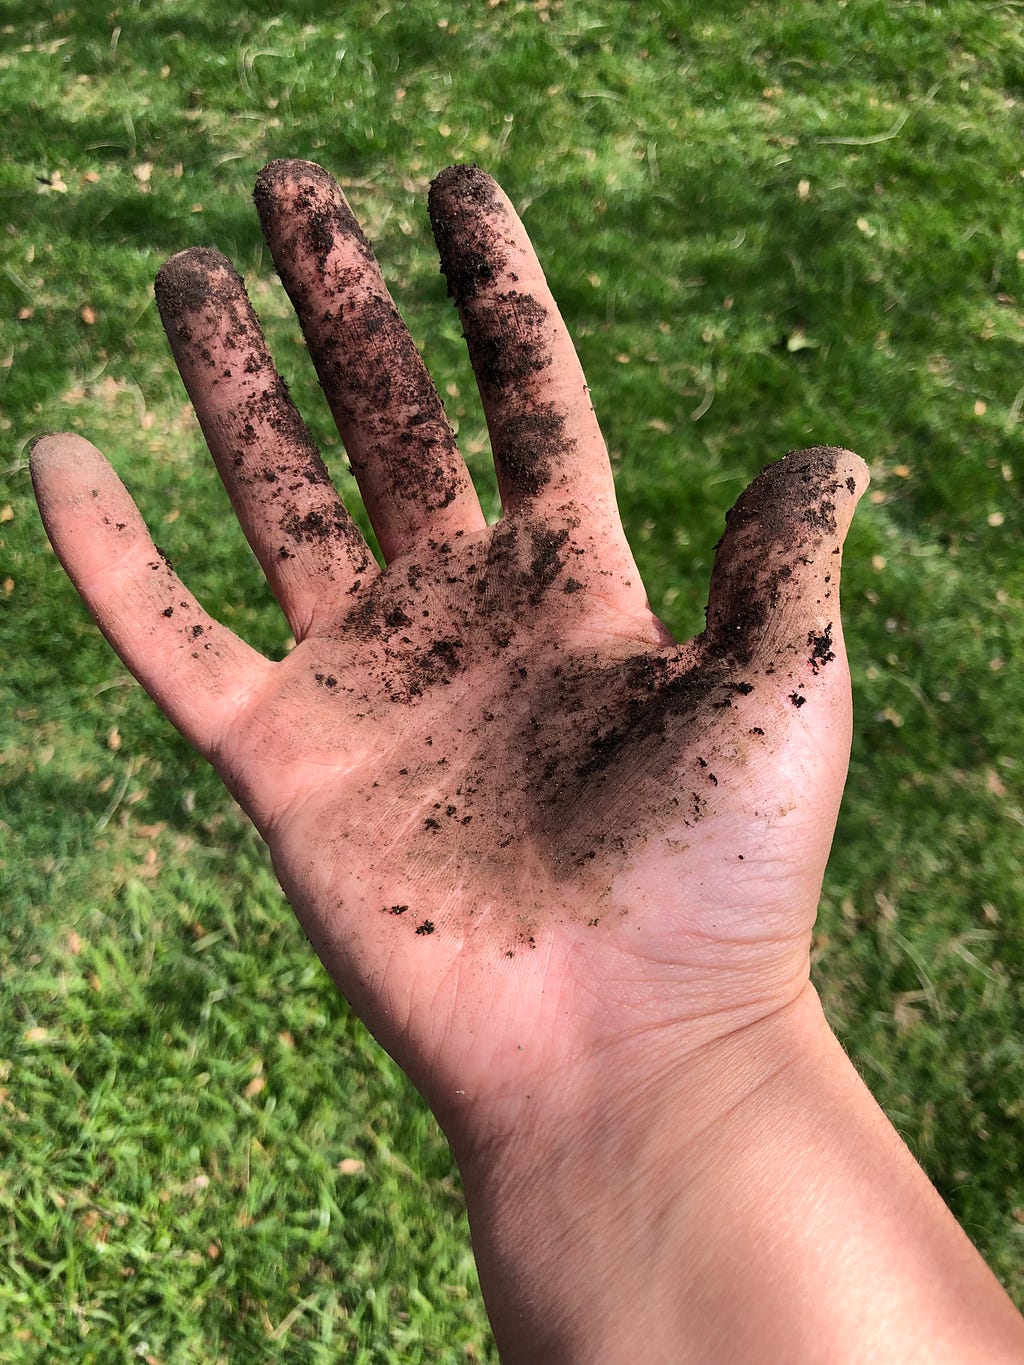 Image of a hand open with soil spread across it. There is grass in the background.